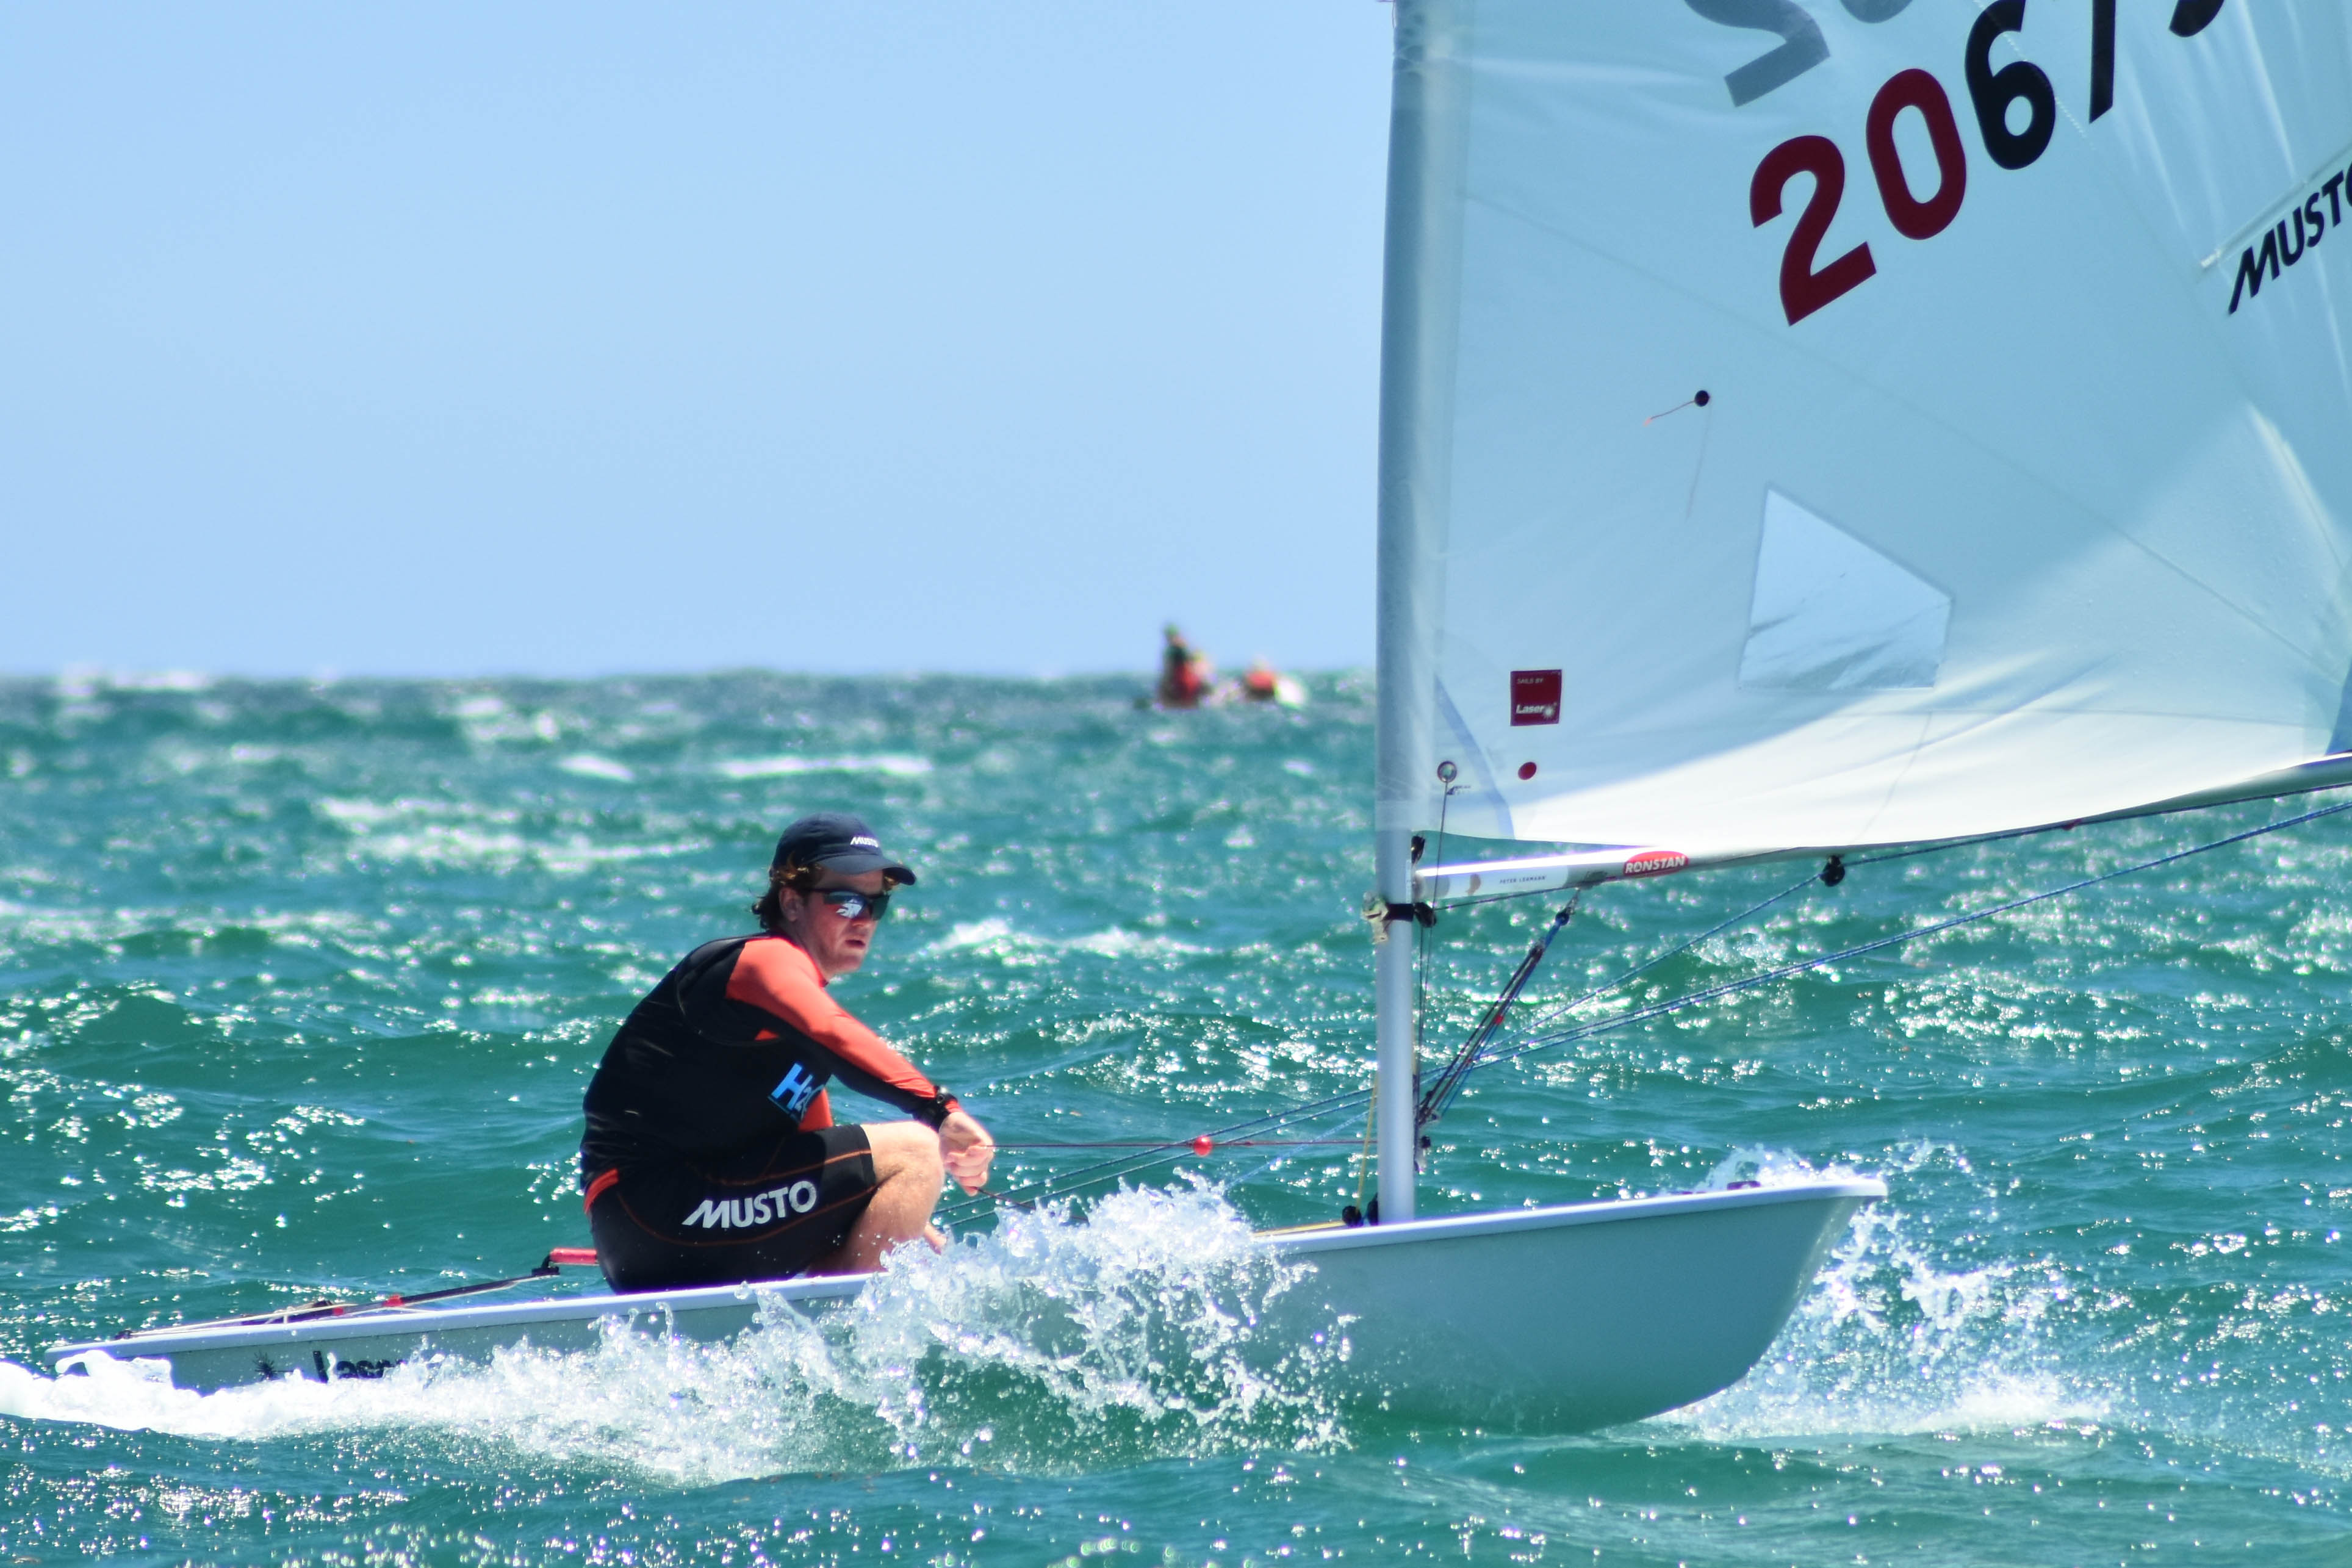 Sam King racing in yesterday's practice race. Photo: Down Under Sail